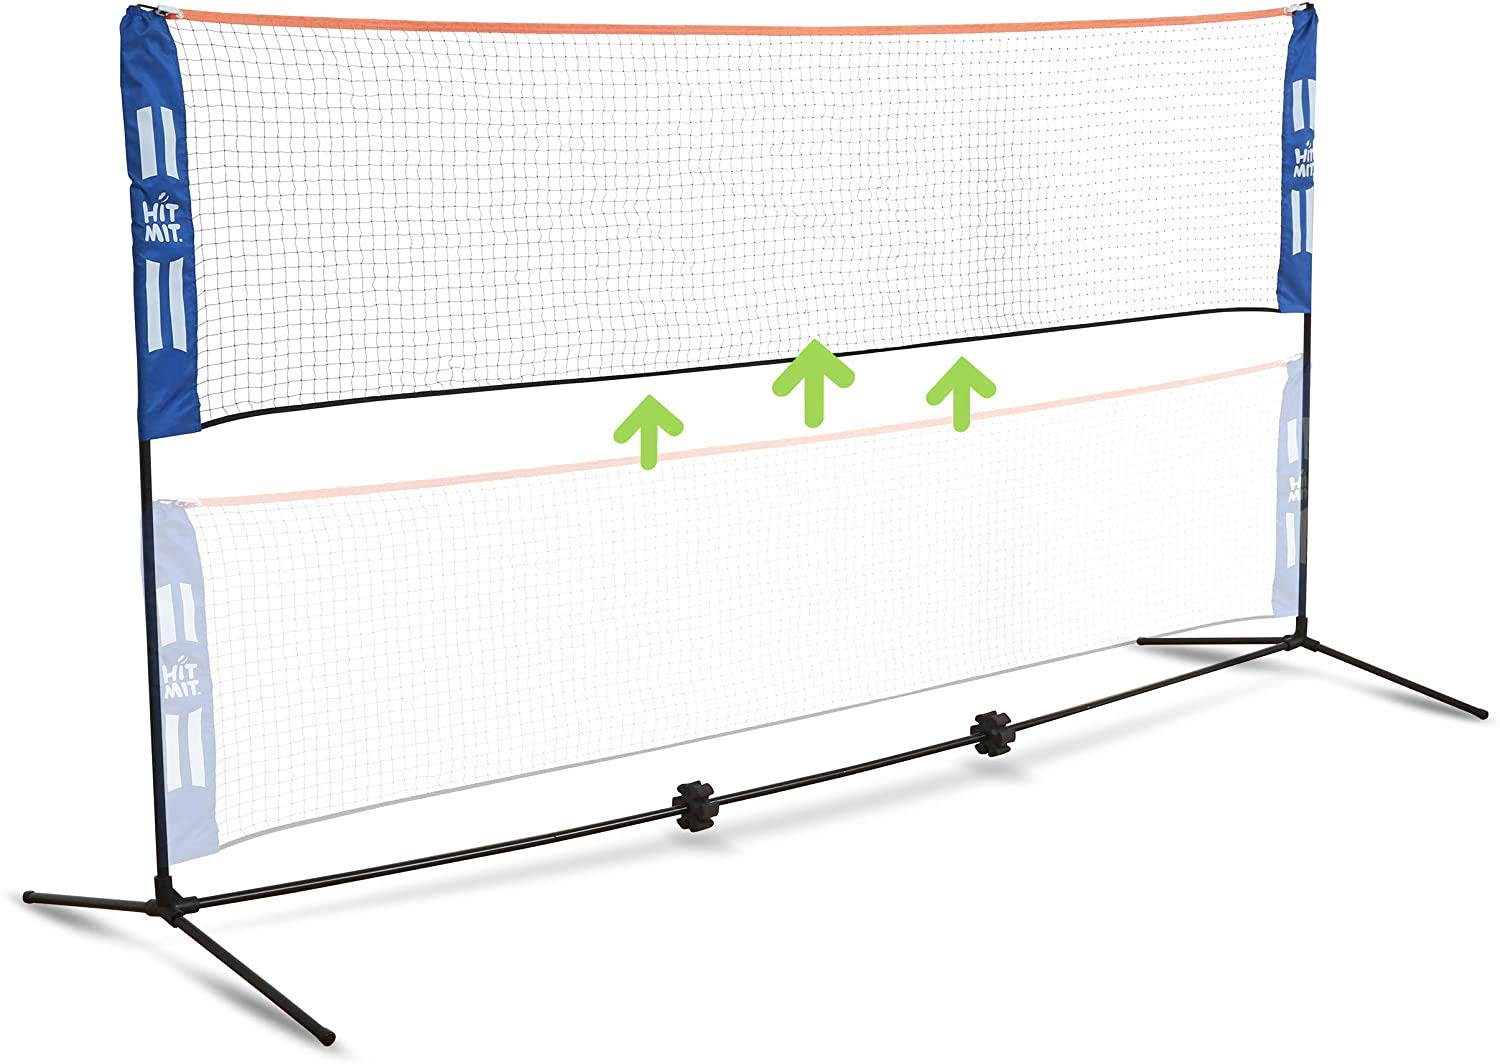 JOOLA HIT MIT Adjustable Height Portable Badminton Net Set - Competition Multi Sport Indoor or Outdoor Net for Playing Pickleball, Kids Volleyball, Soccer Tennis, Lawn Tennis - Easy and Fast Assembly